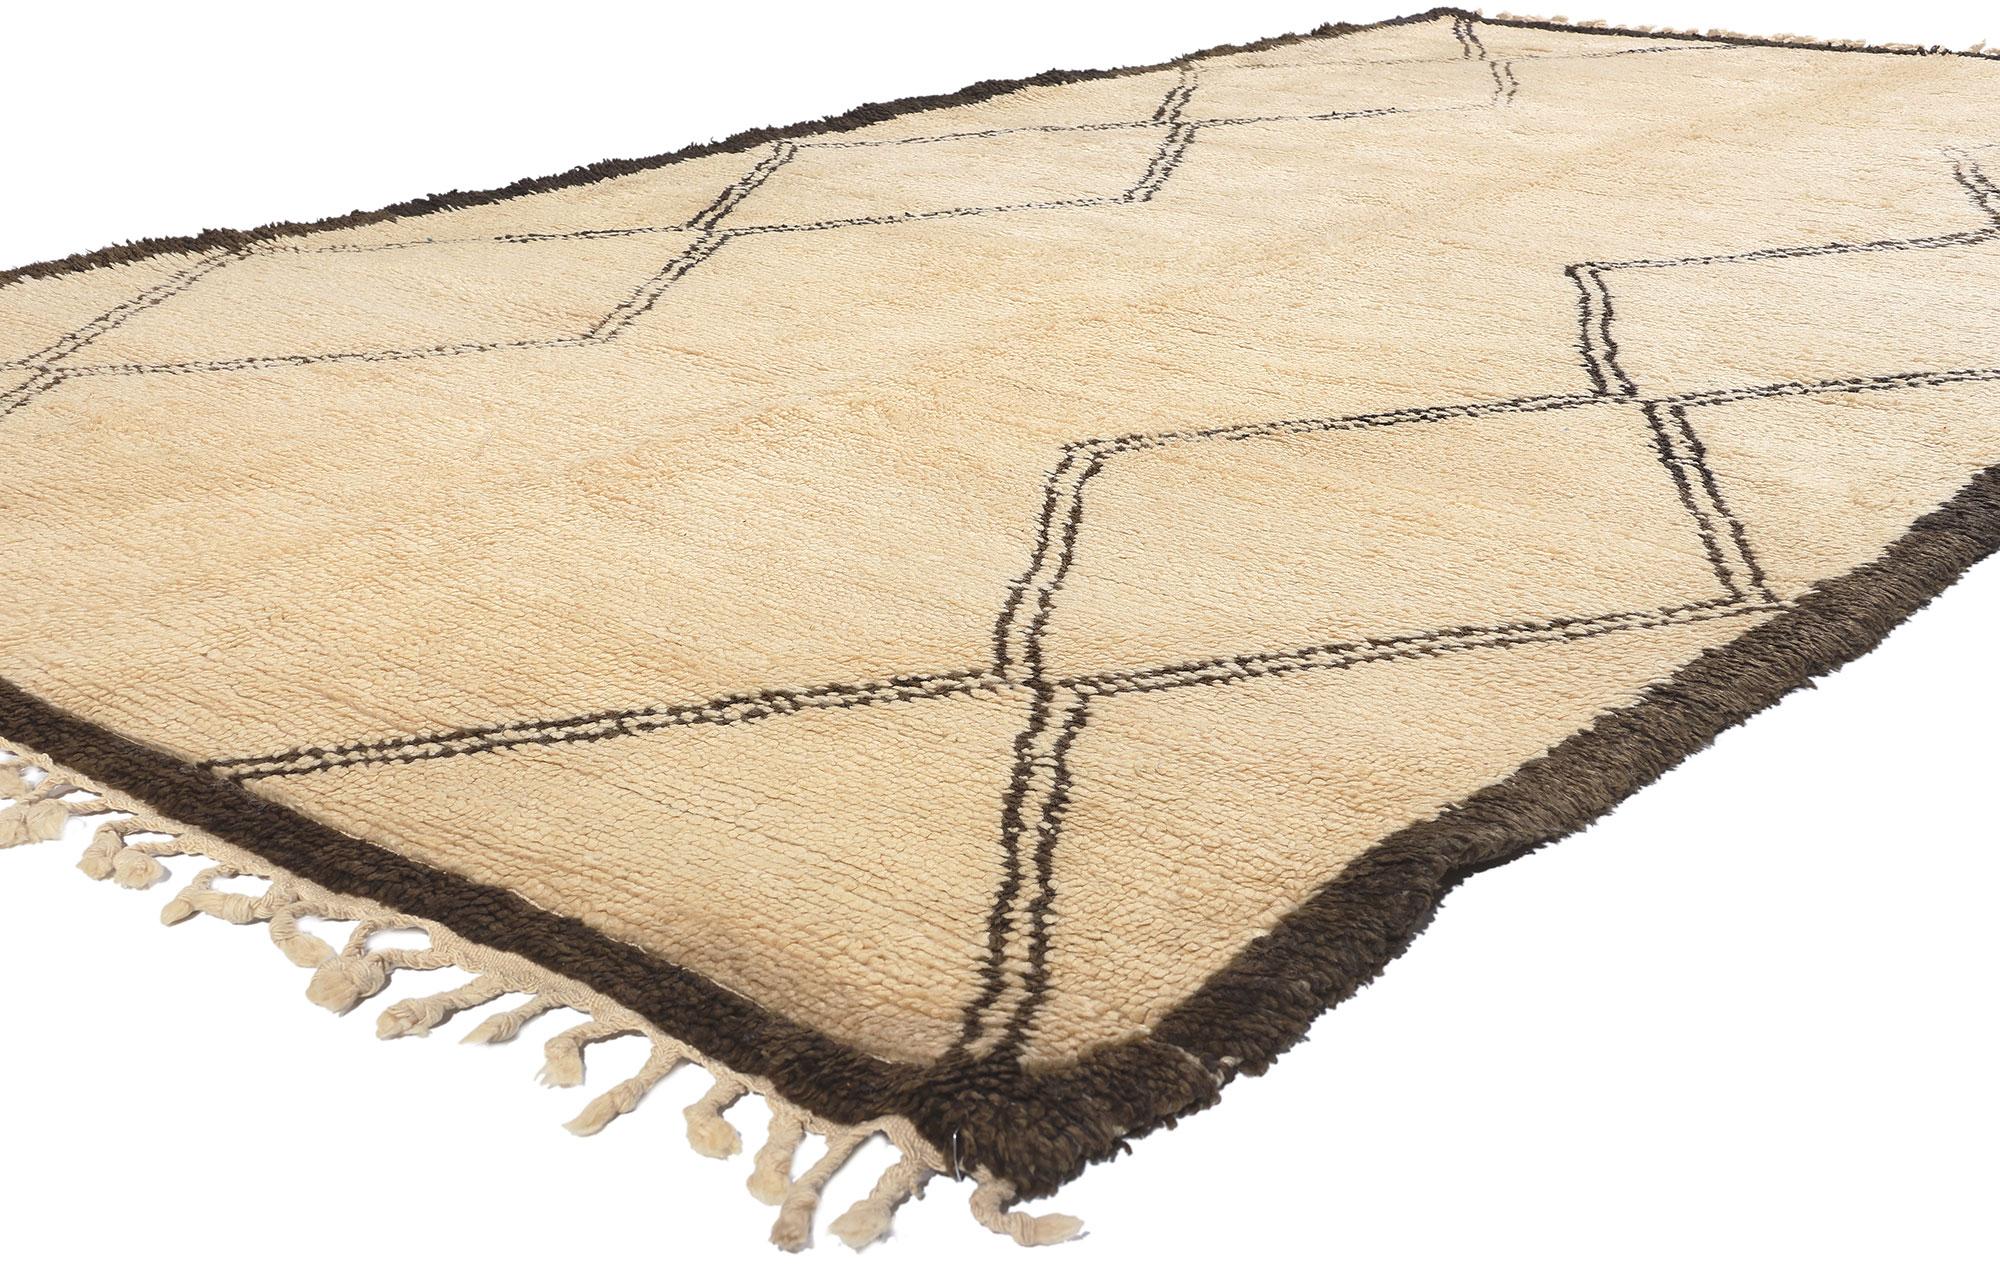 20768 Vintage Moroccan Beni Ourain Rug, 06'04 x 11'01. Step into the realm of Midcentury Modern sophistication with this hand-knotted wool vintage Moroccan Beni Ourain rug. Across the abrashed cream field, two columns of diamond lattices unfold,